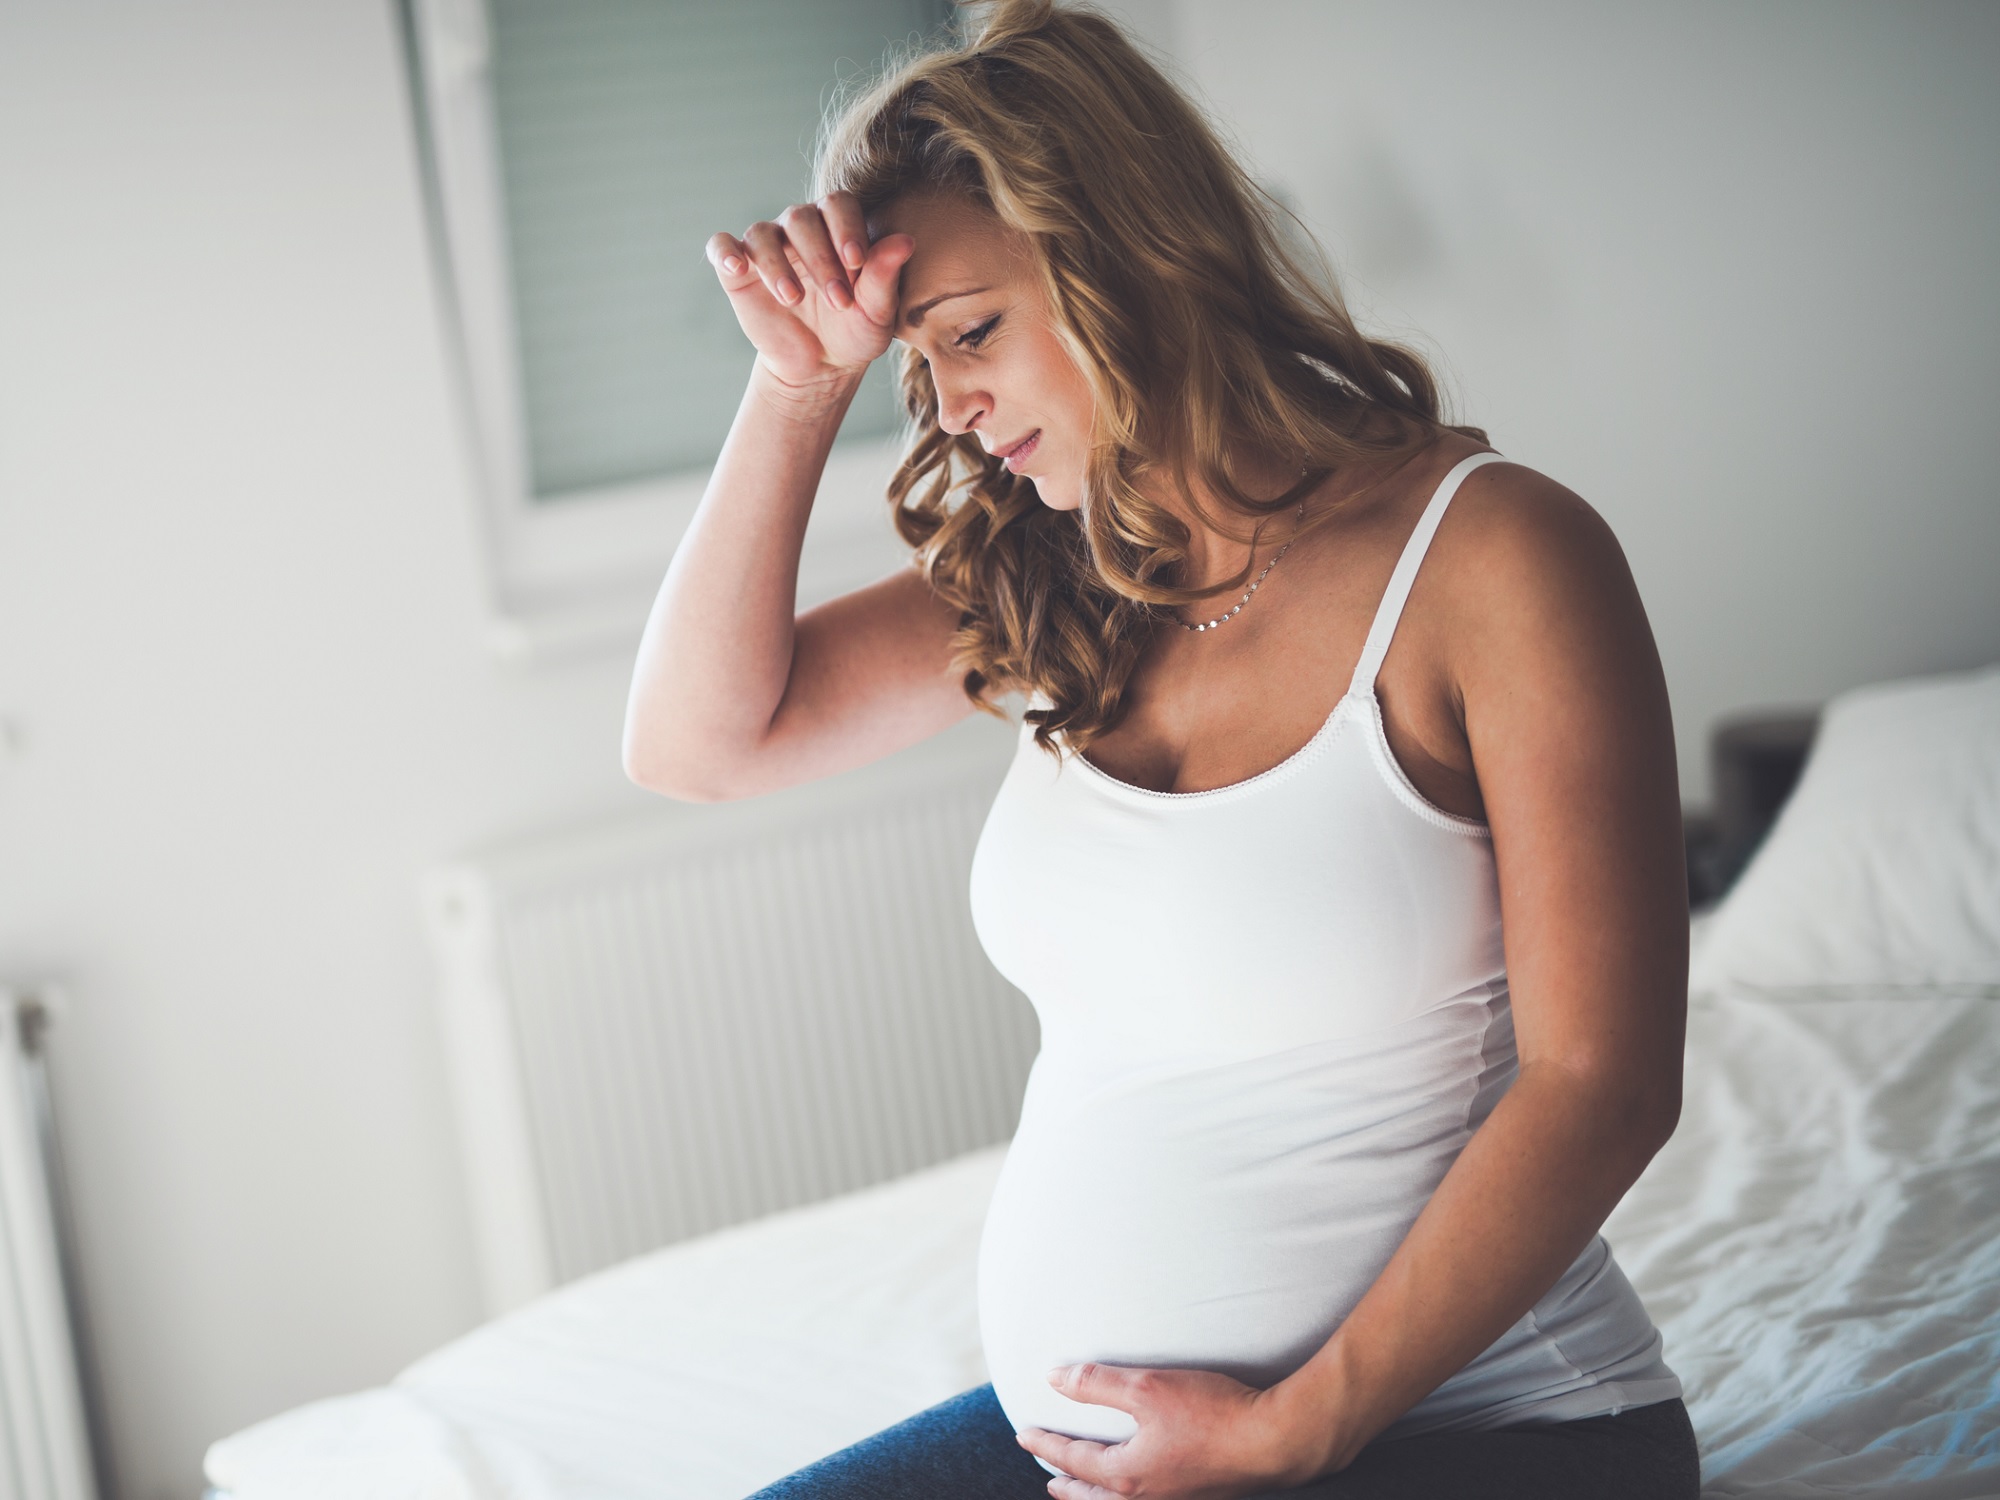 Pregnant woman looking stressed